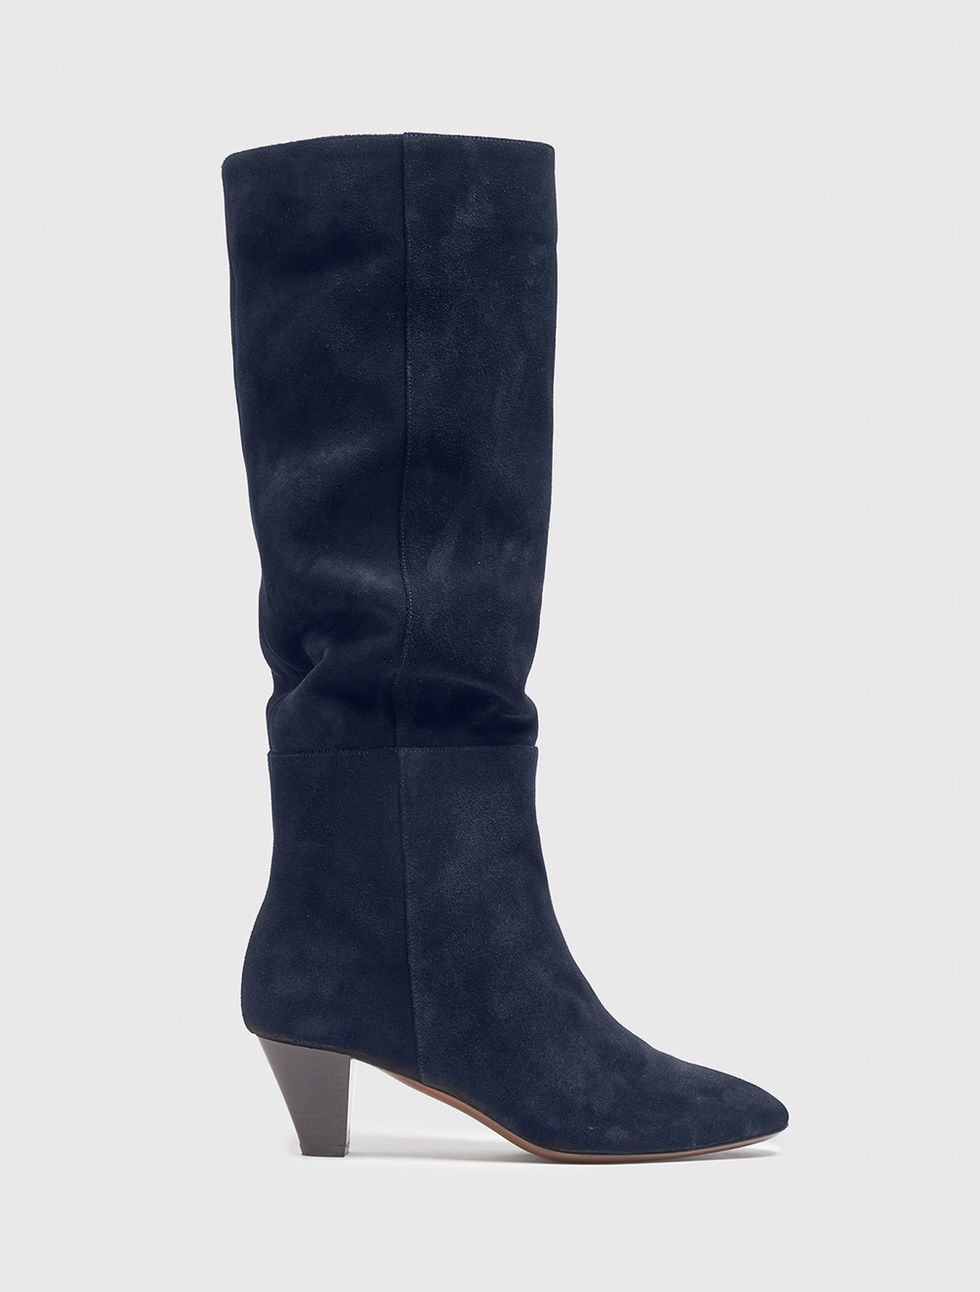 Footwear, Boot, Shoe, Leather, Knee-high boot, Suede, Durango boot, High heels, Riding boot, 